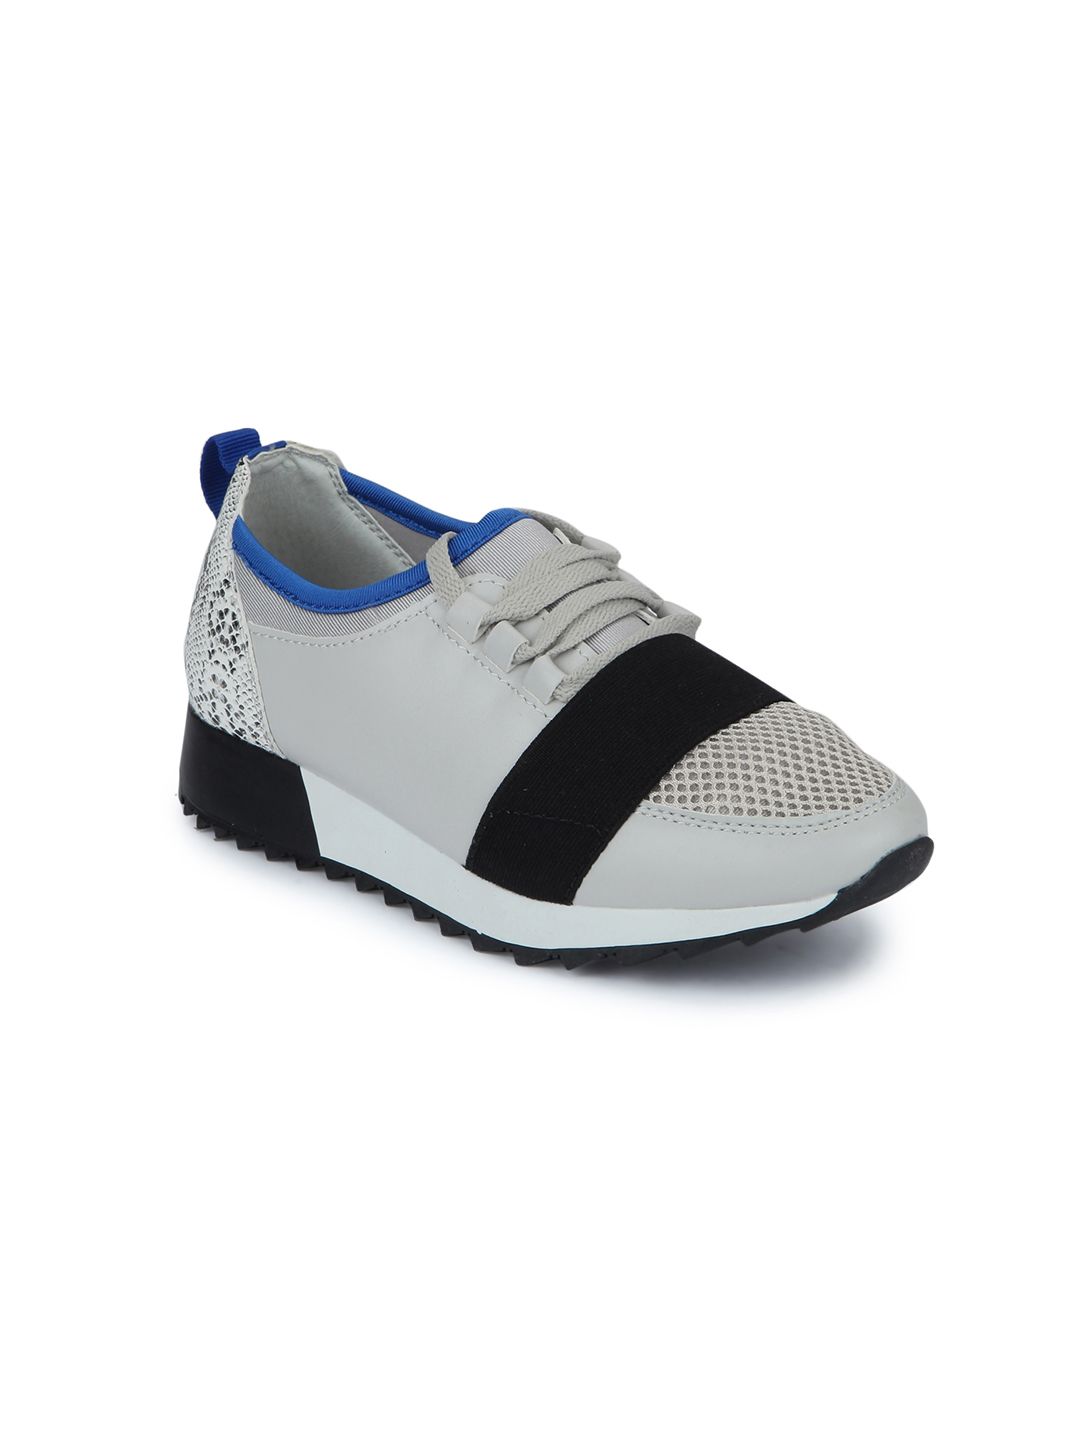 Truffle Collection Women Grey Sneakers Price in India